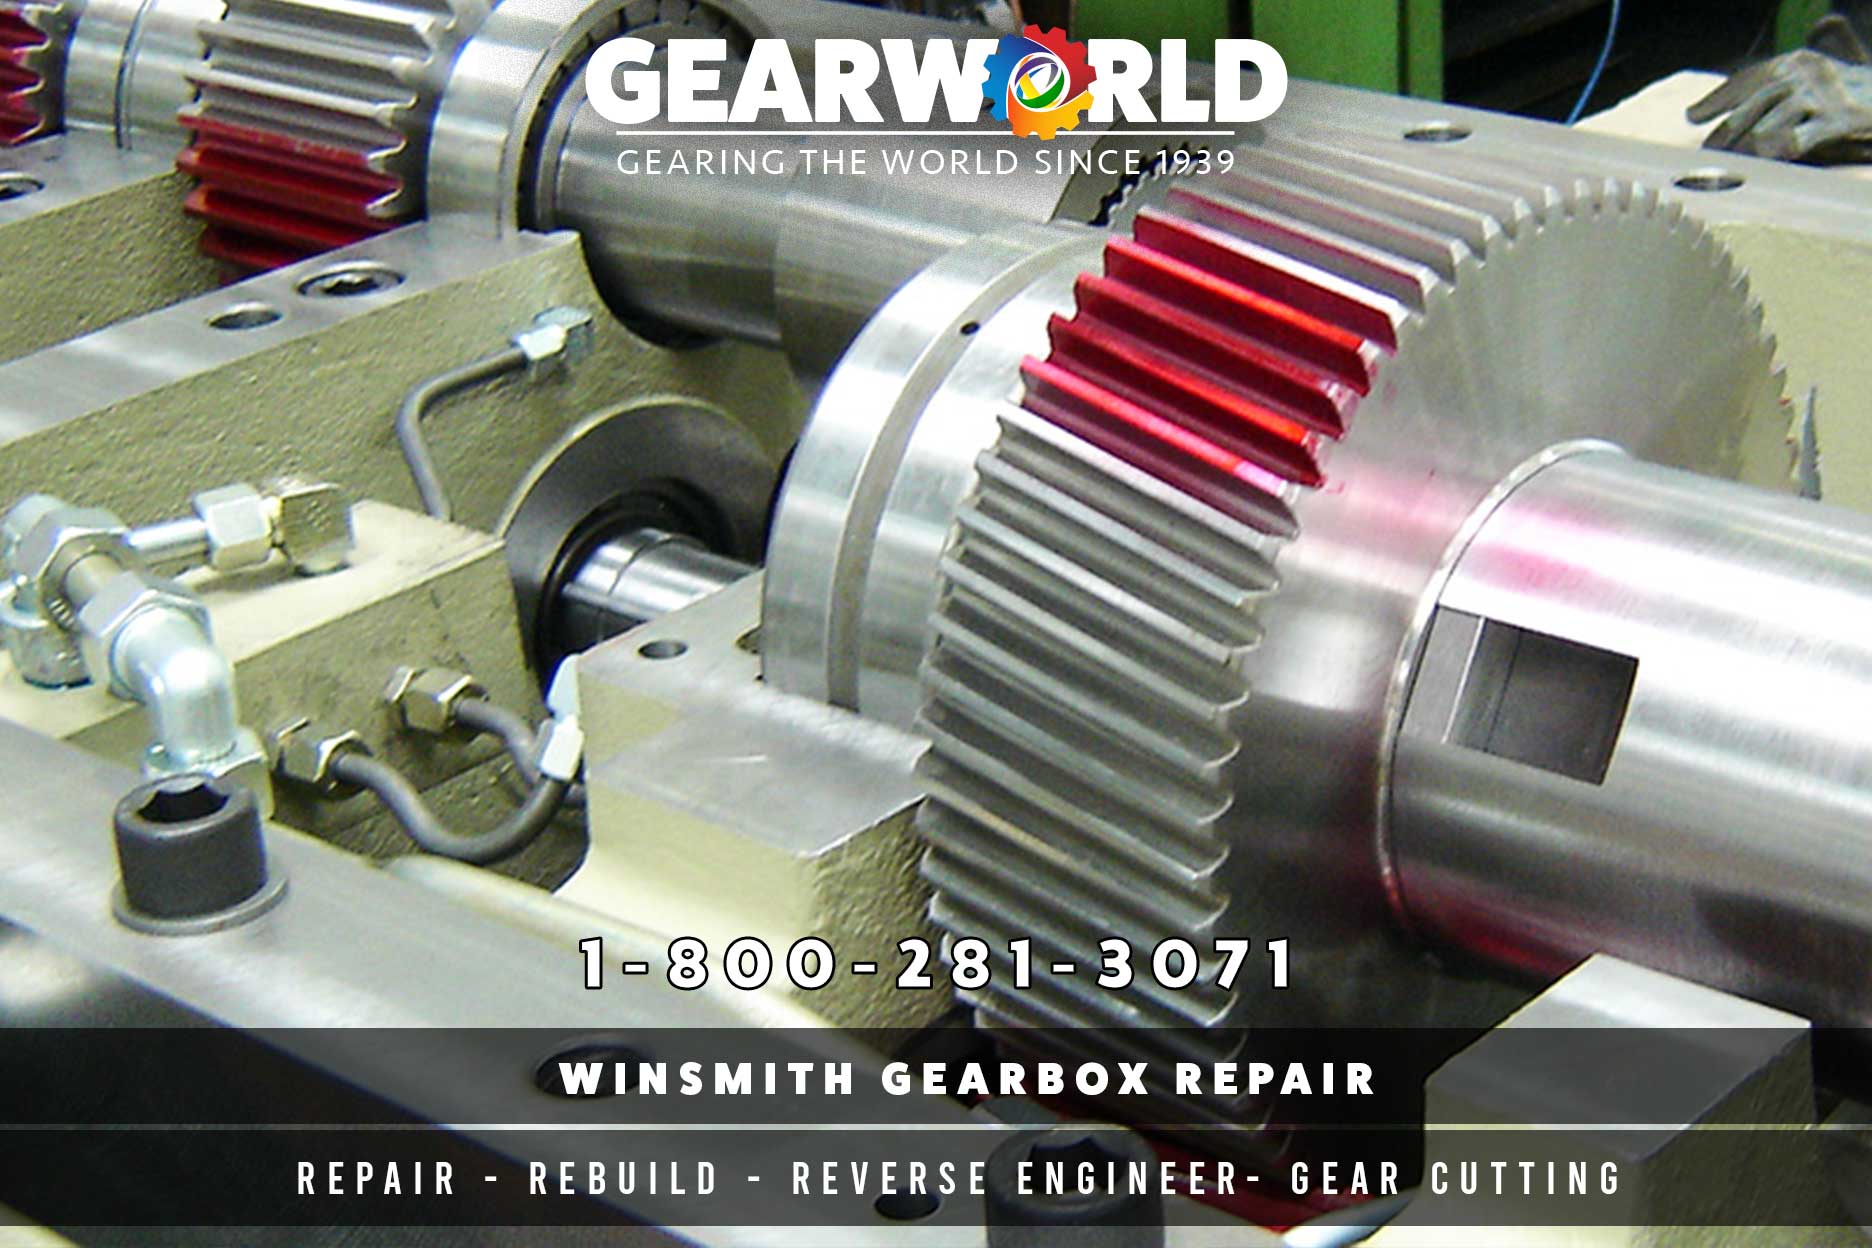 Winsmith Gearbox